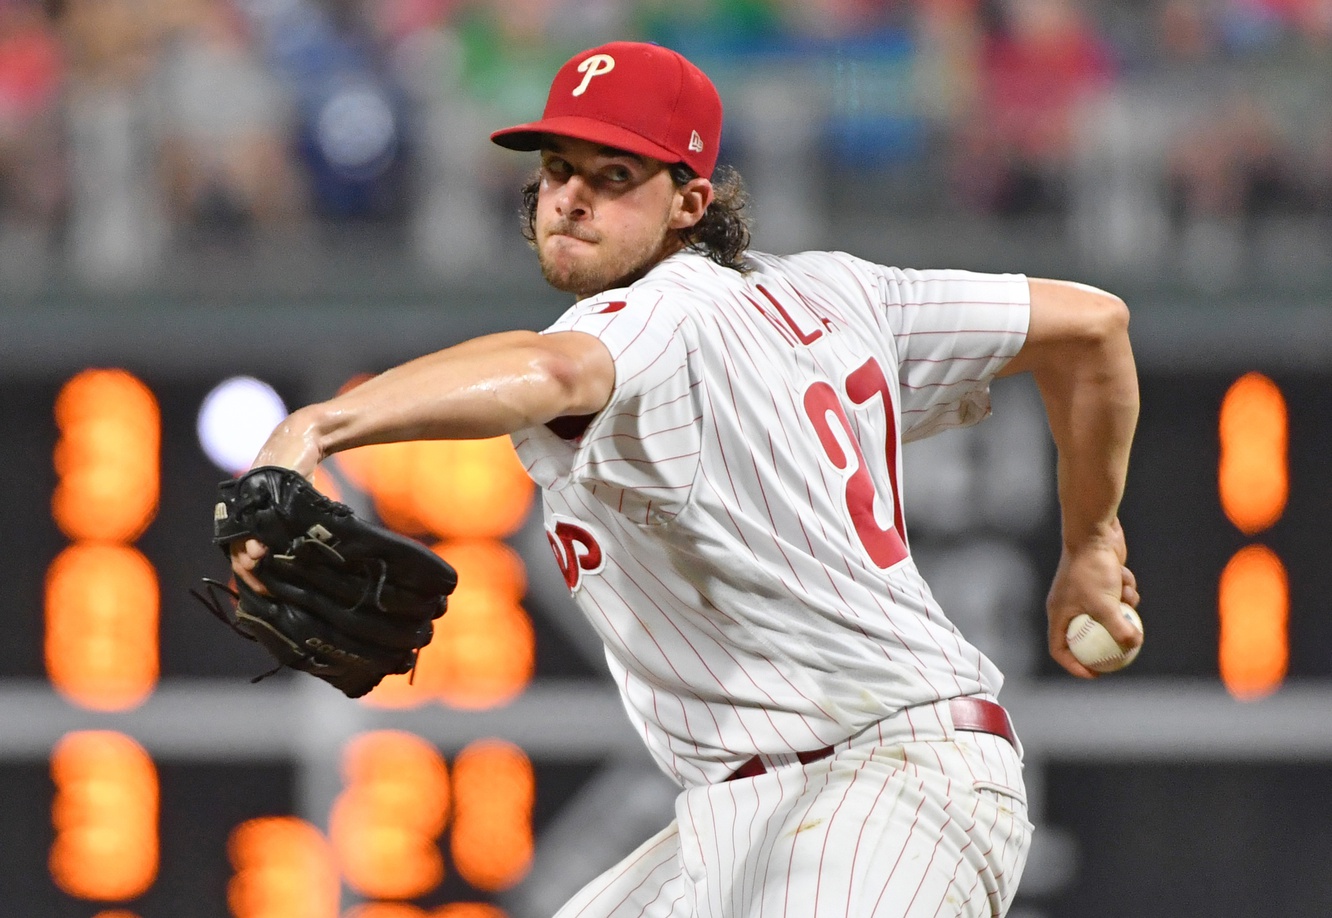 In Case You Didn’t Already Know It, The Phillies Are Done